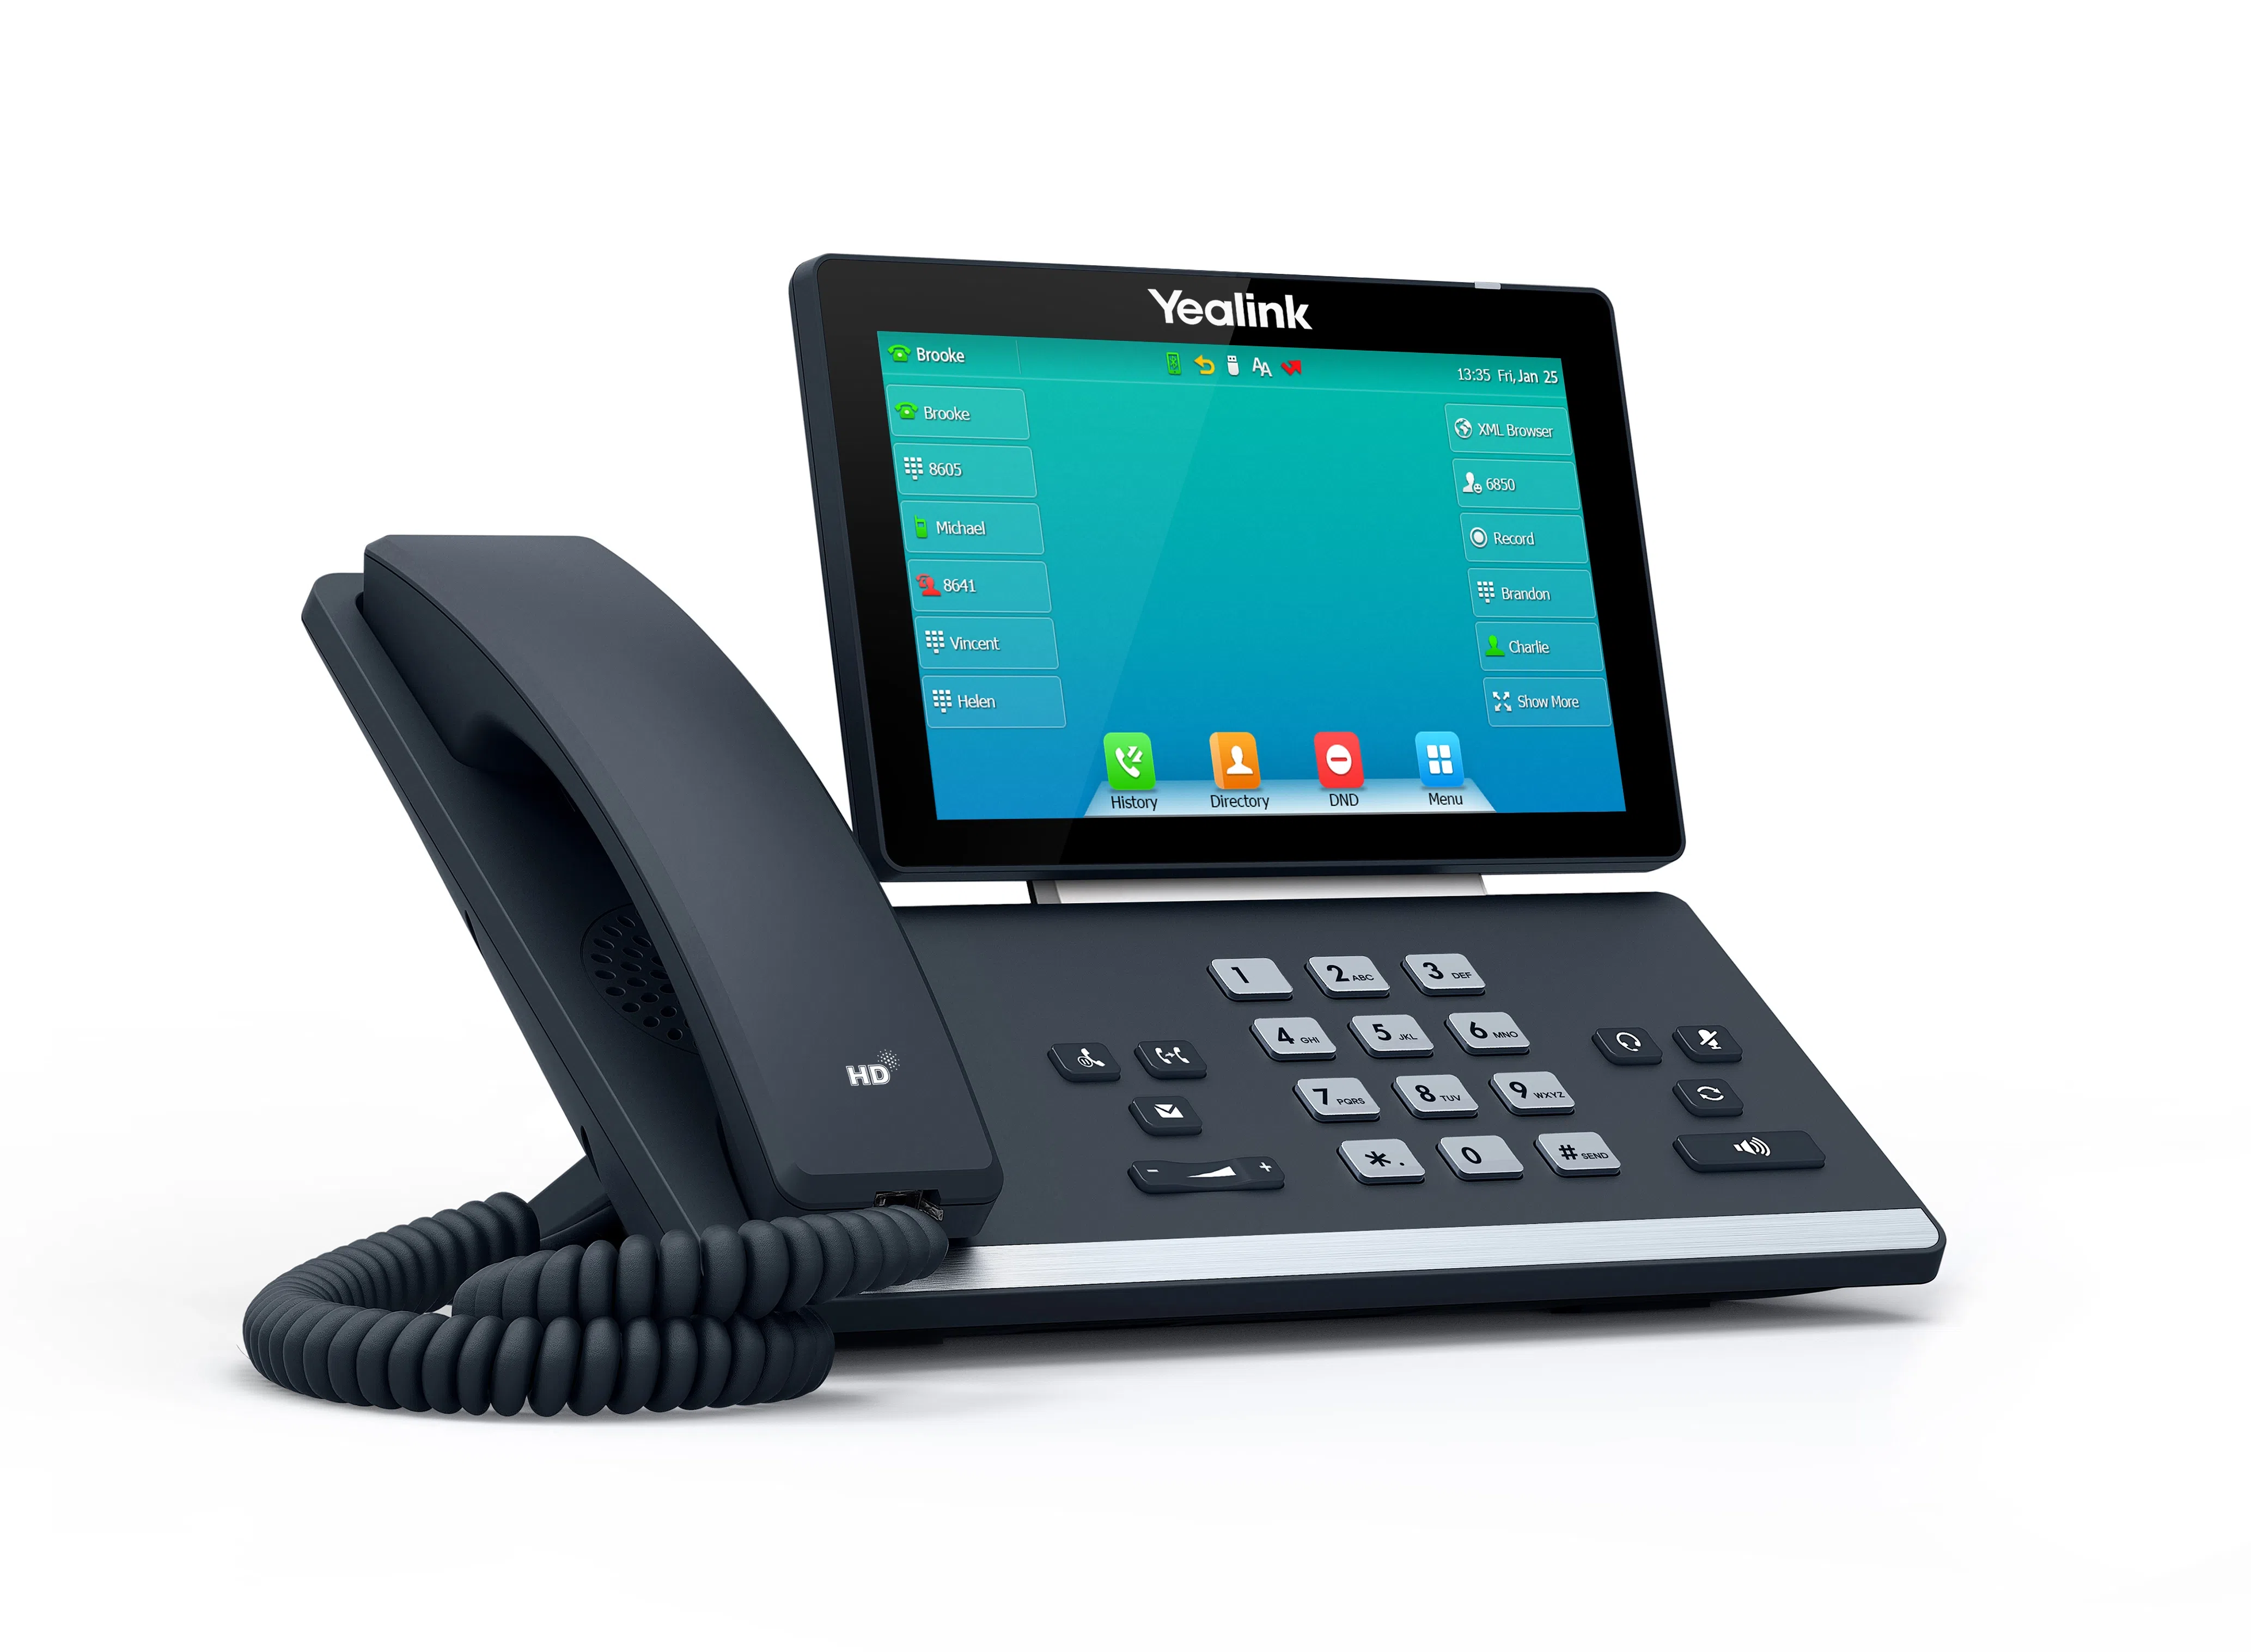 Can you provide the UPC for the Yealink T57W Premium IP Phone 1301089?